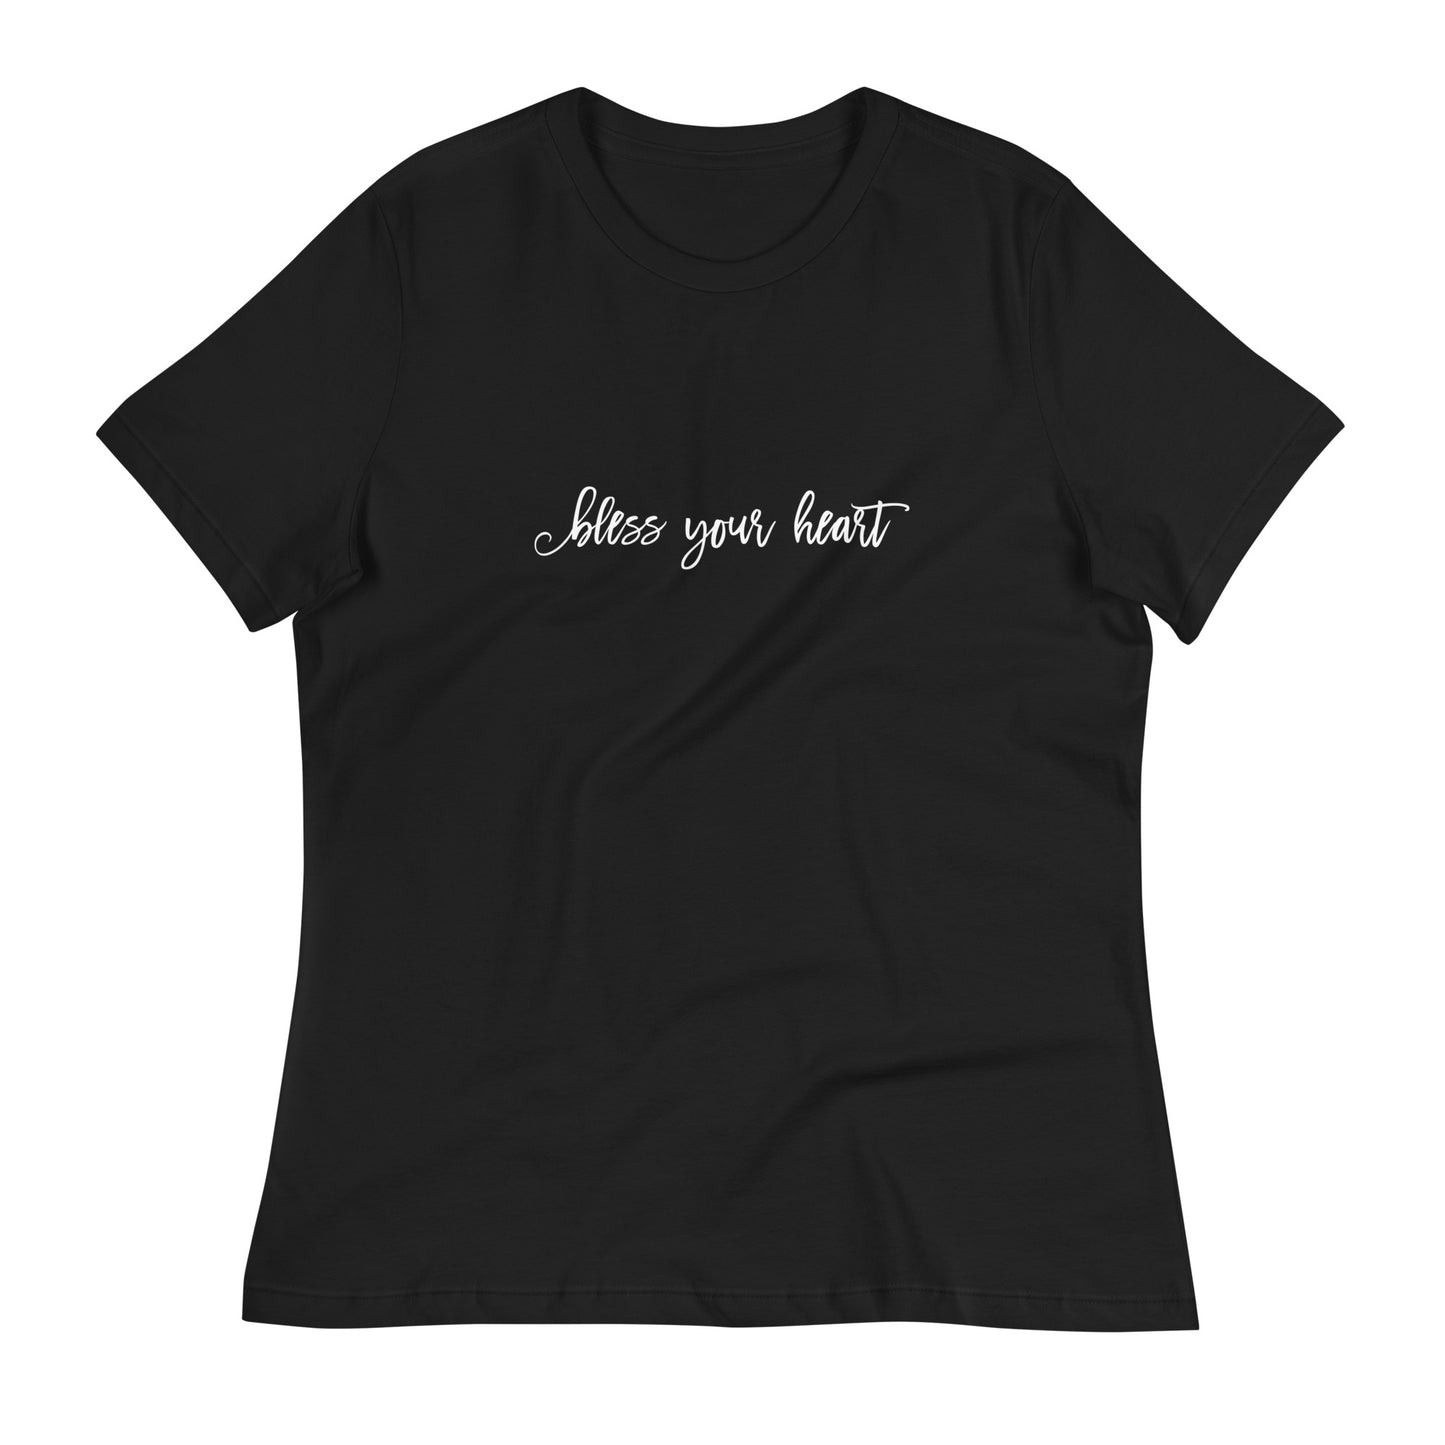 Black women's relaxed fit t-shirt with white graphic in an excessively twee font: "bless your heart"